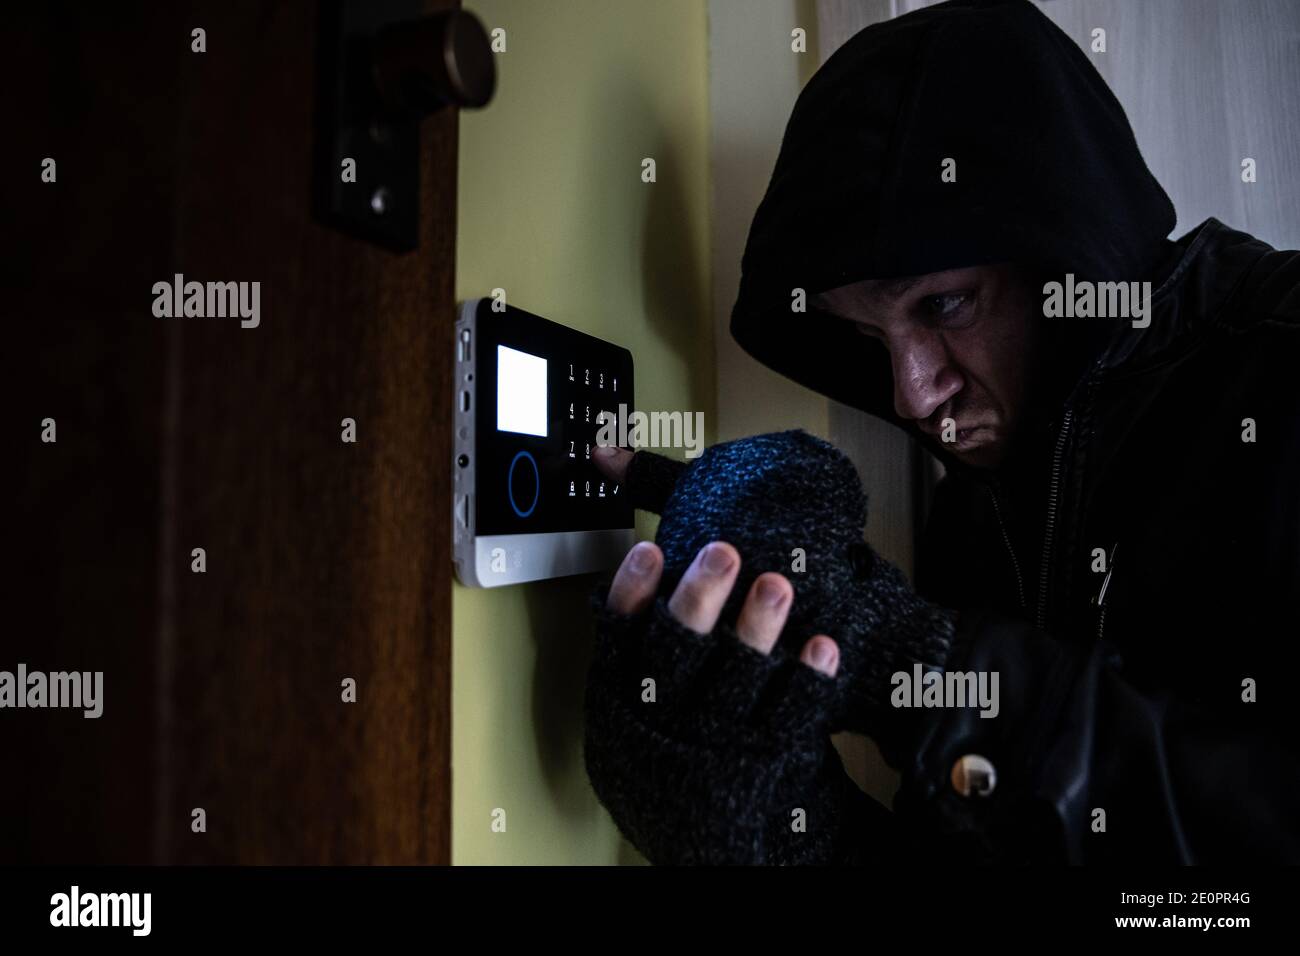 A burglar with gloves and a hood on his head tries to disarm the alarm system. Stock Photo